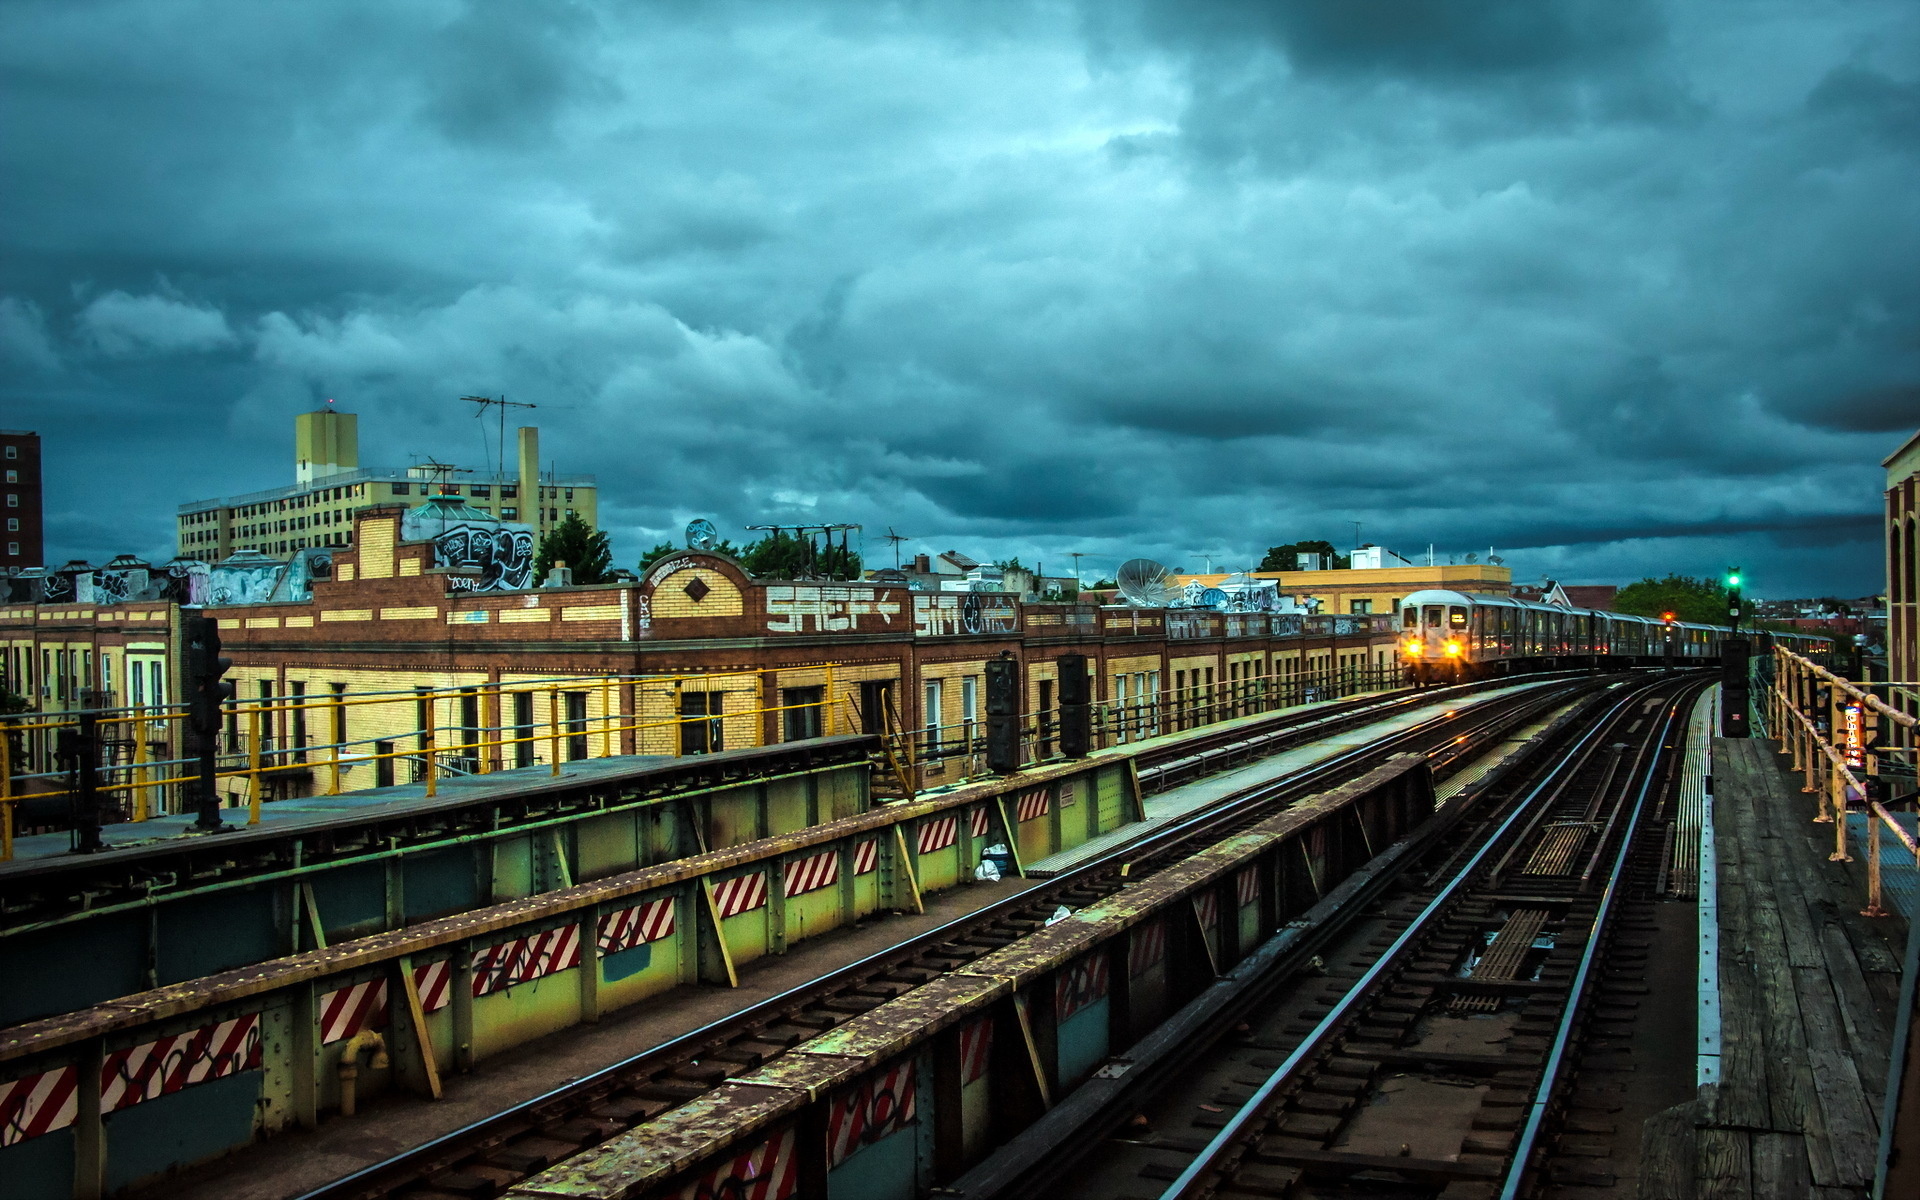 places, Trains, Subway, Tracks, Cities, Architecture, Buildings, Clouds Wallpaper